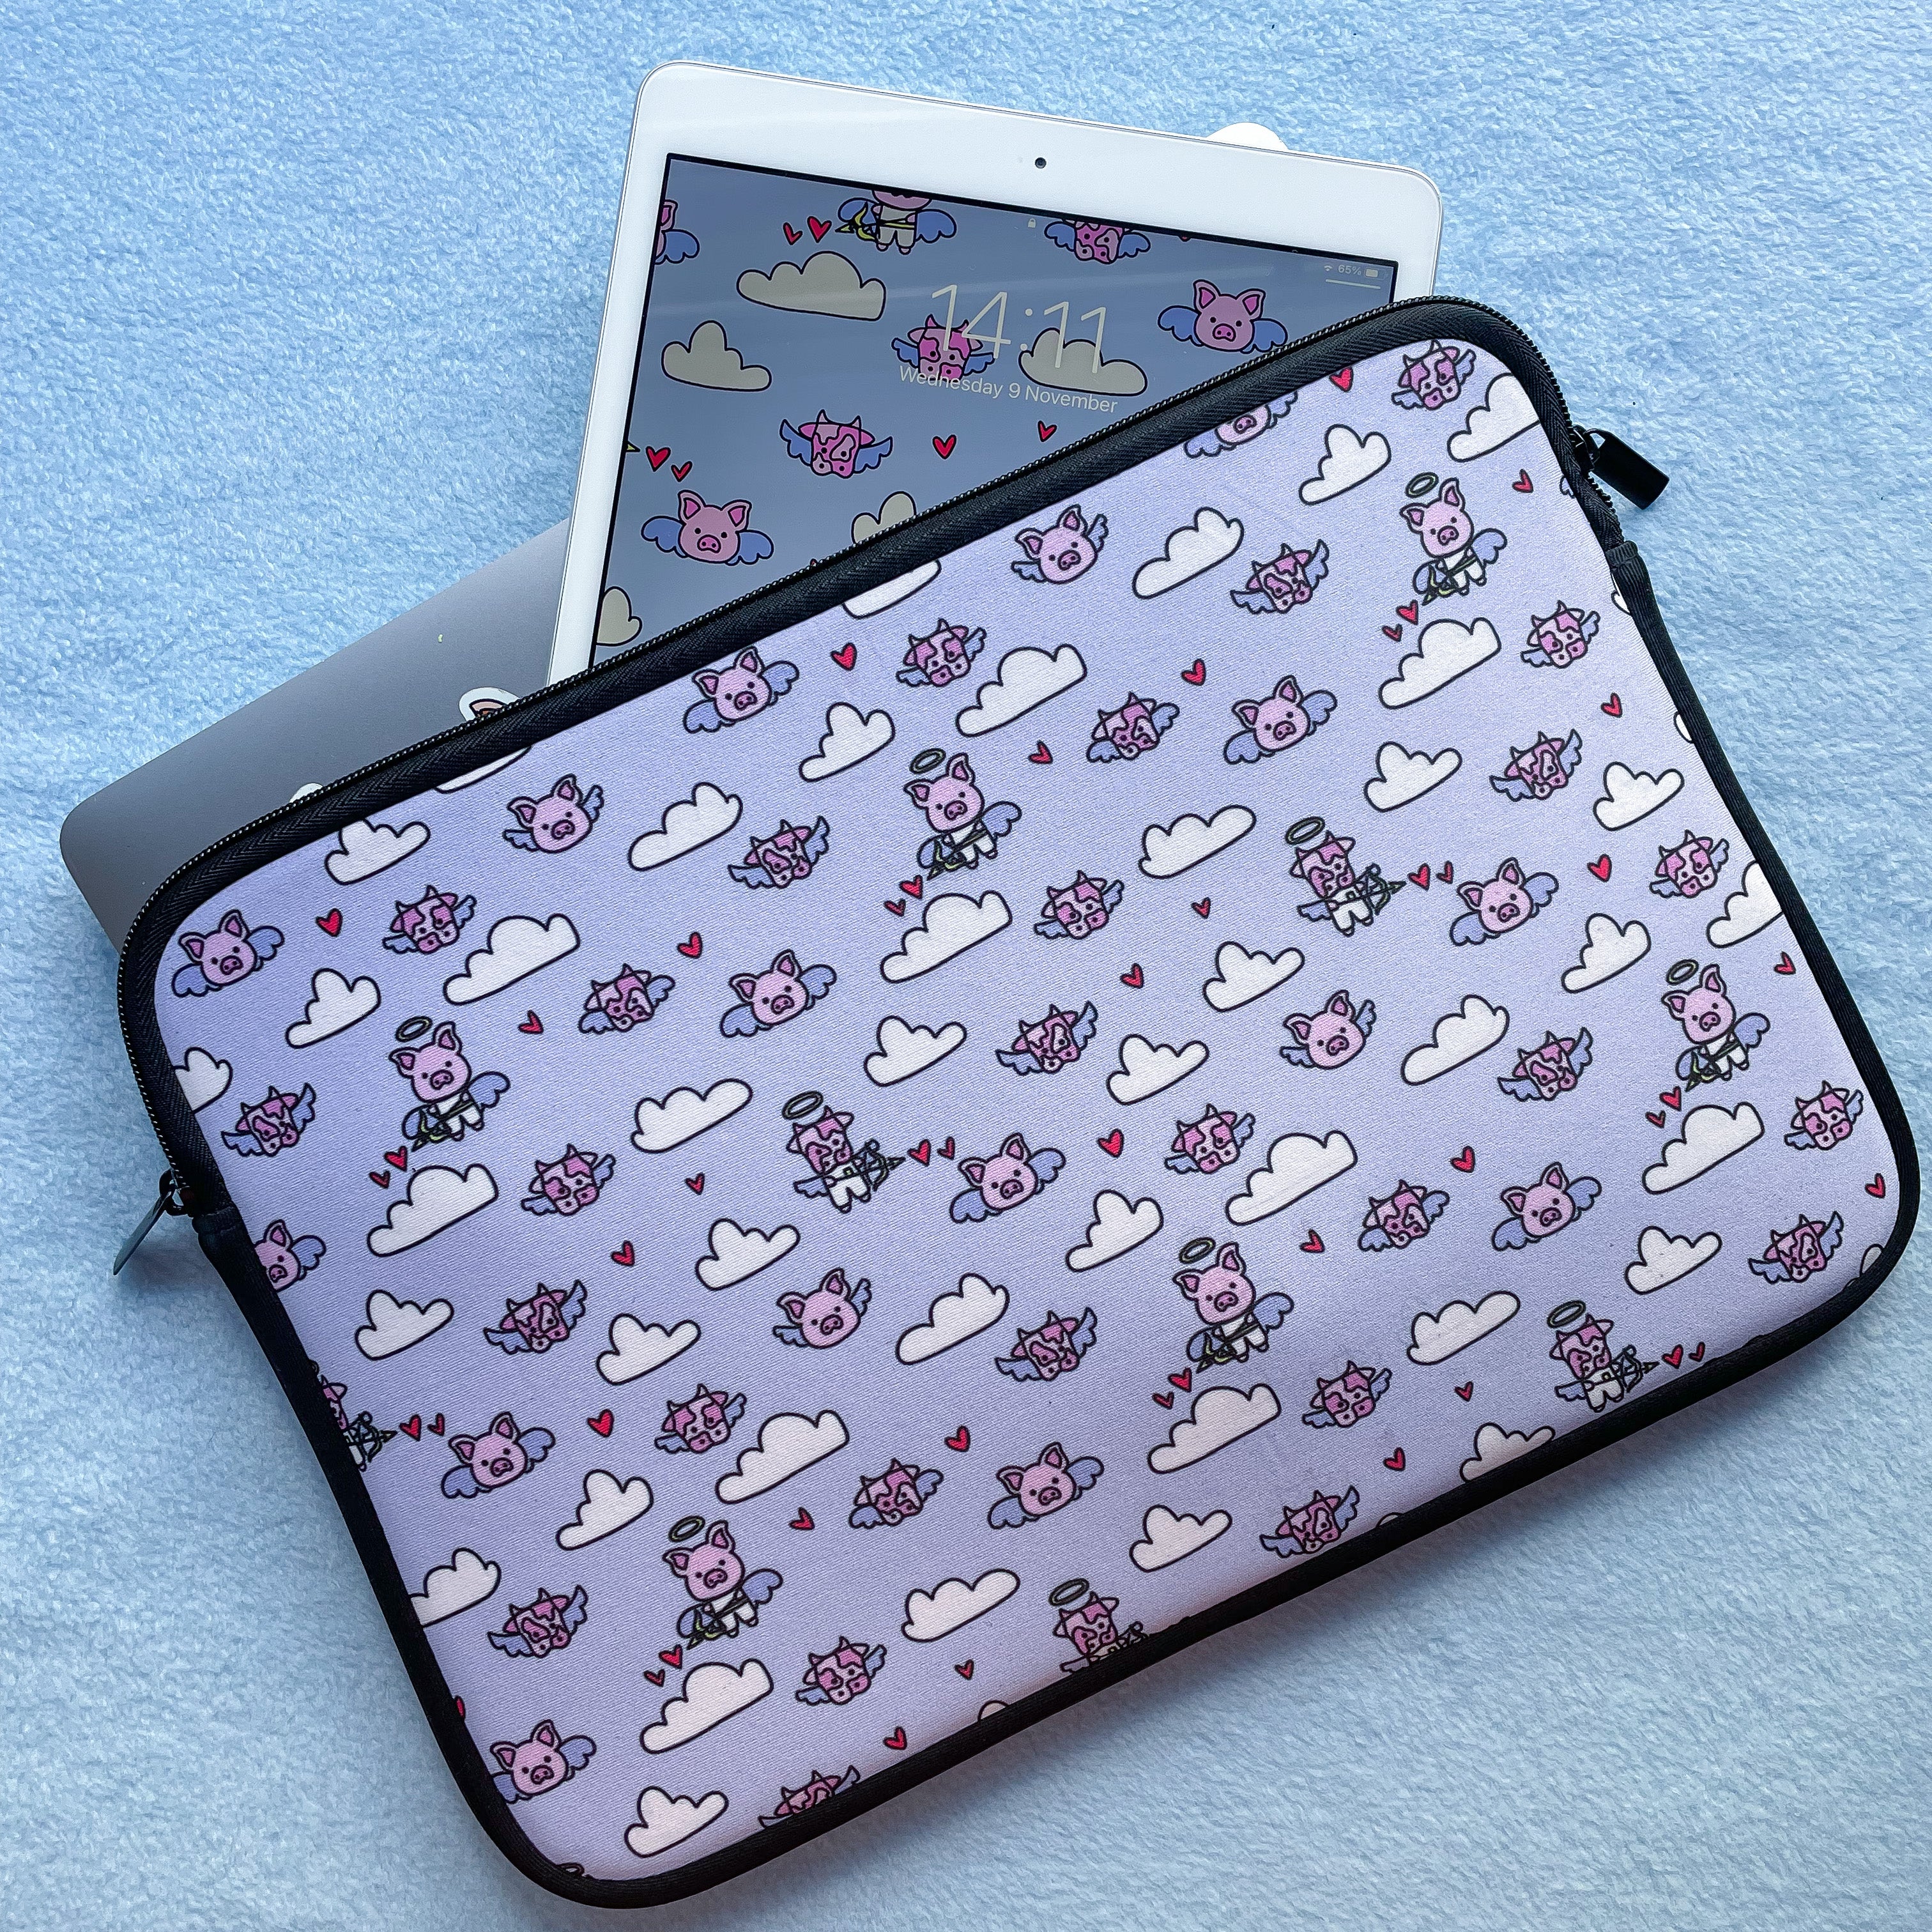 Device Sleeve - Cupig Print *MADE-TO-ORDER*